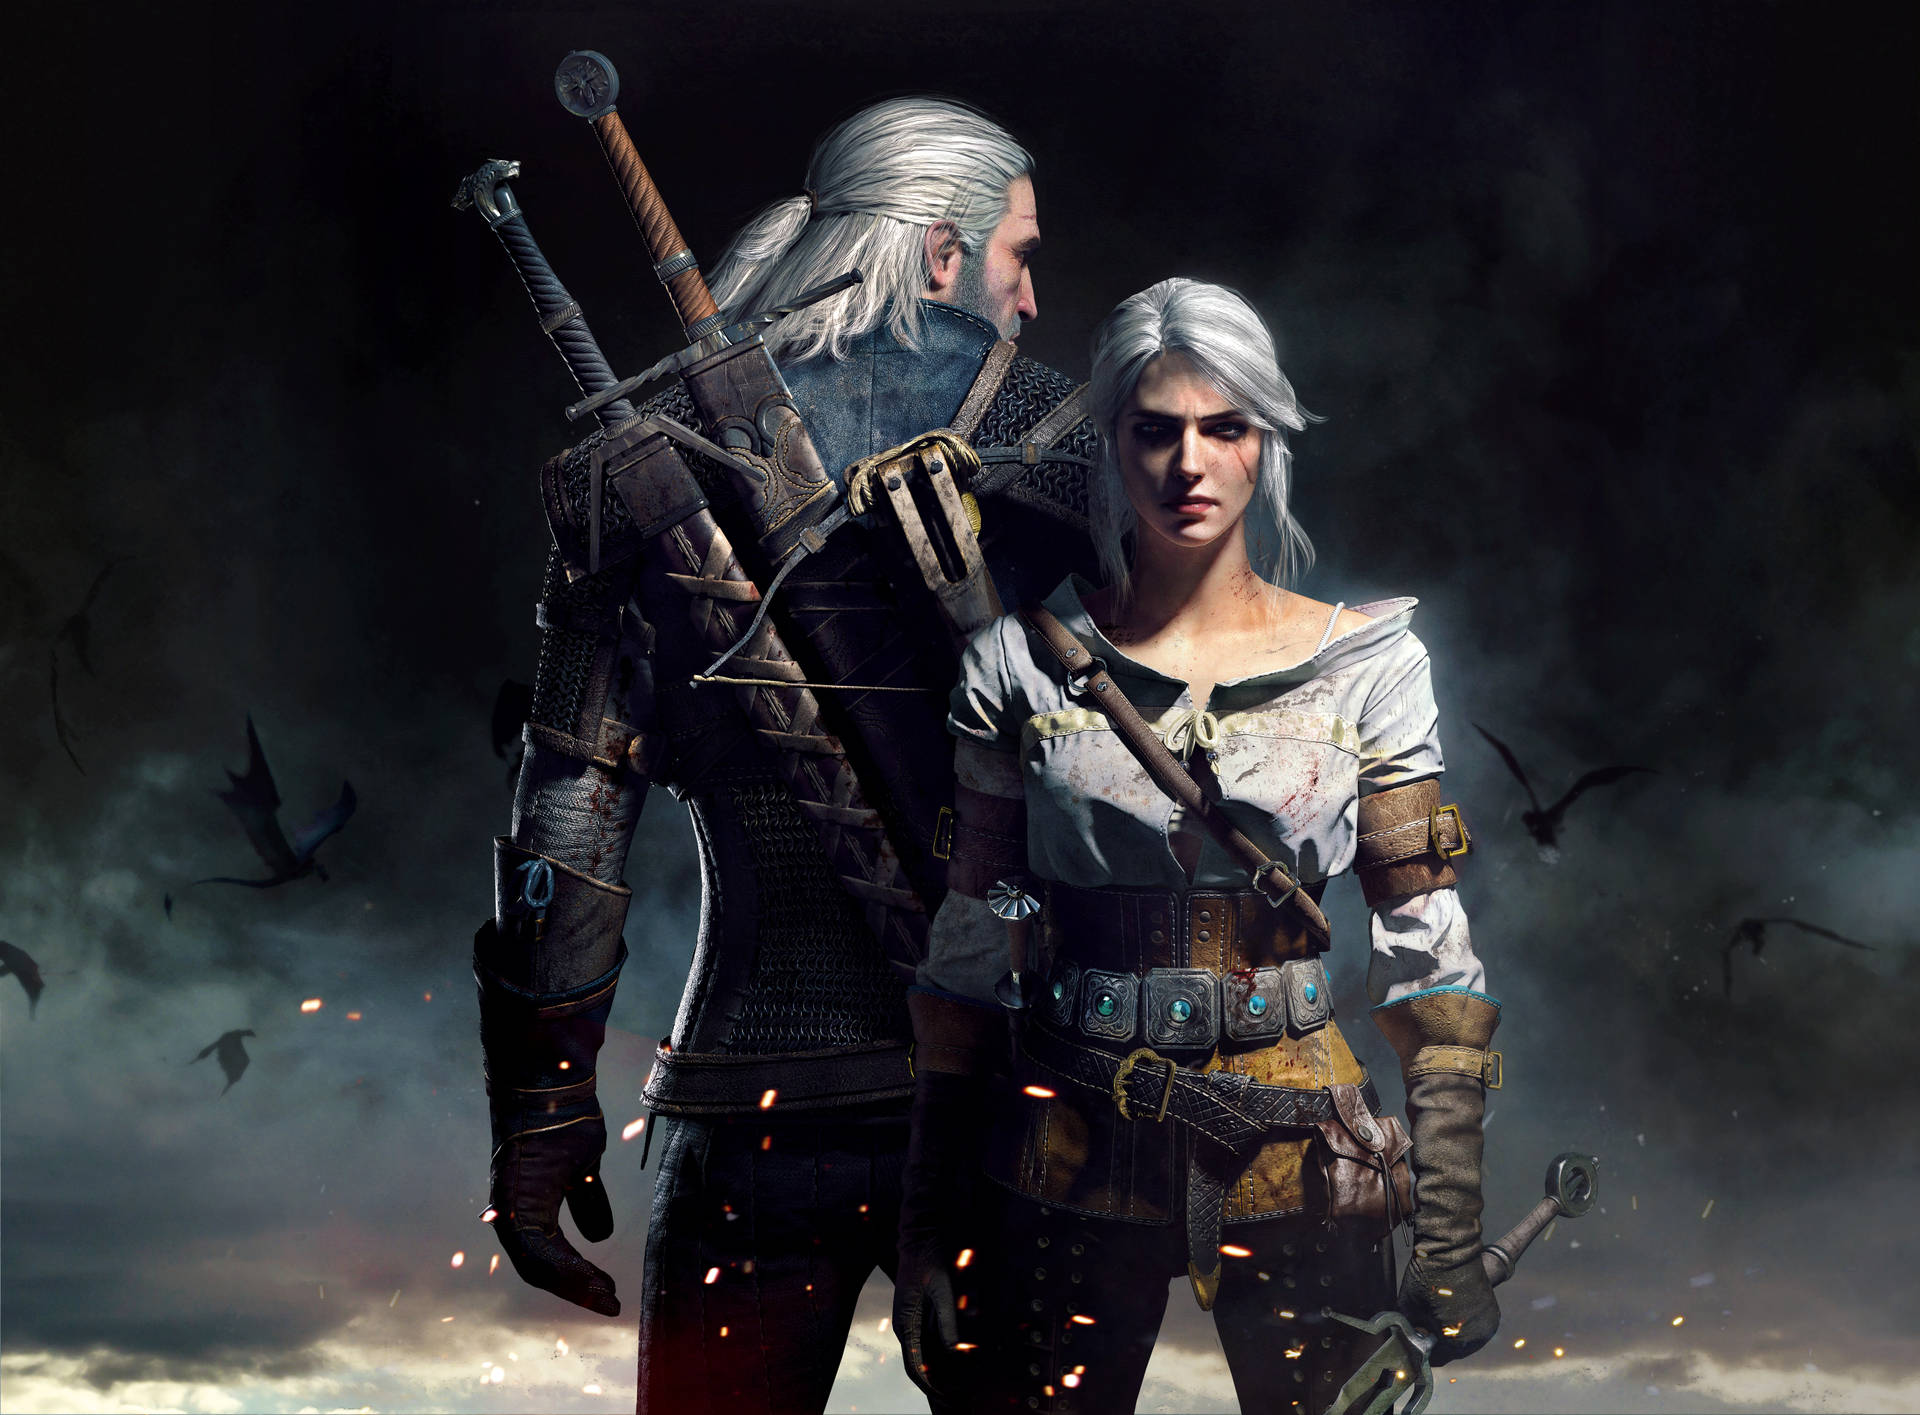 The Witcher 3: Wild Hunt Hd Wallpaper